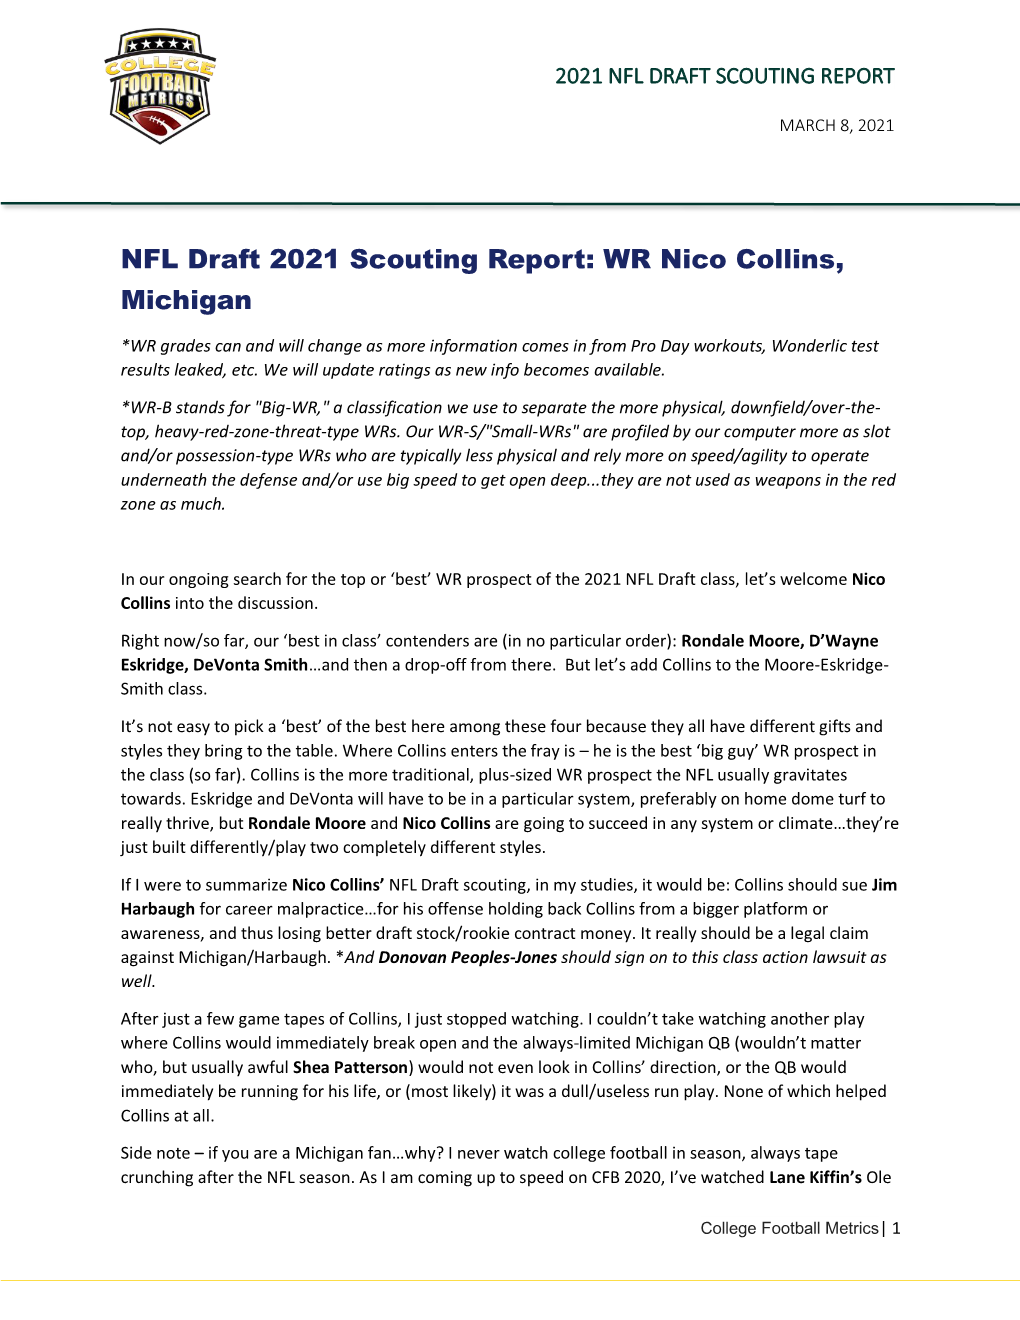 NFL Draft 2021 Scouting Report: WR Nico Collins, Michigan